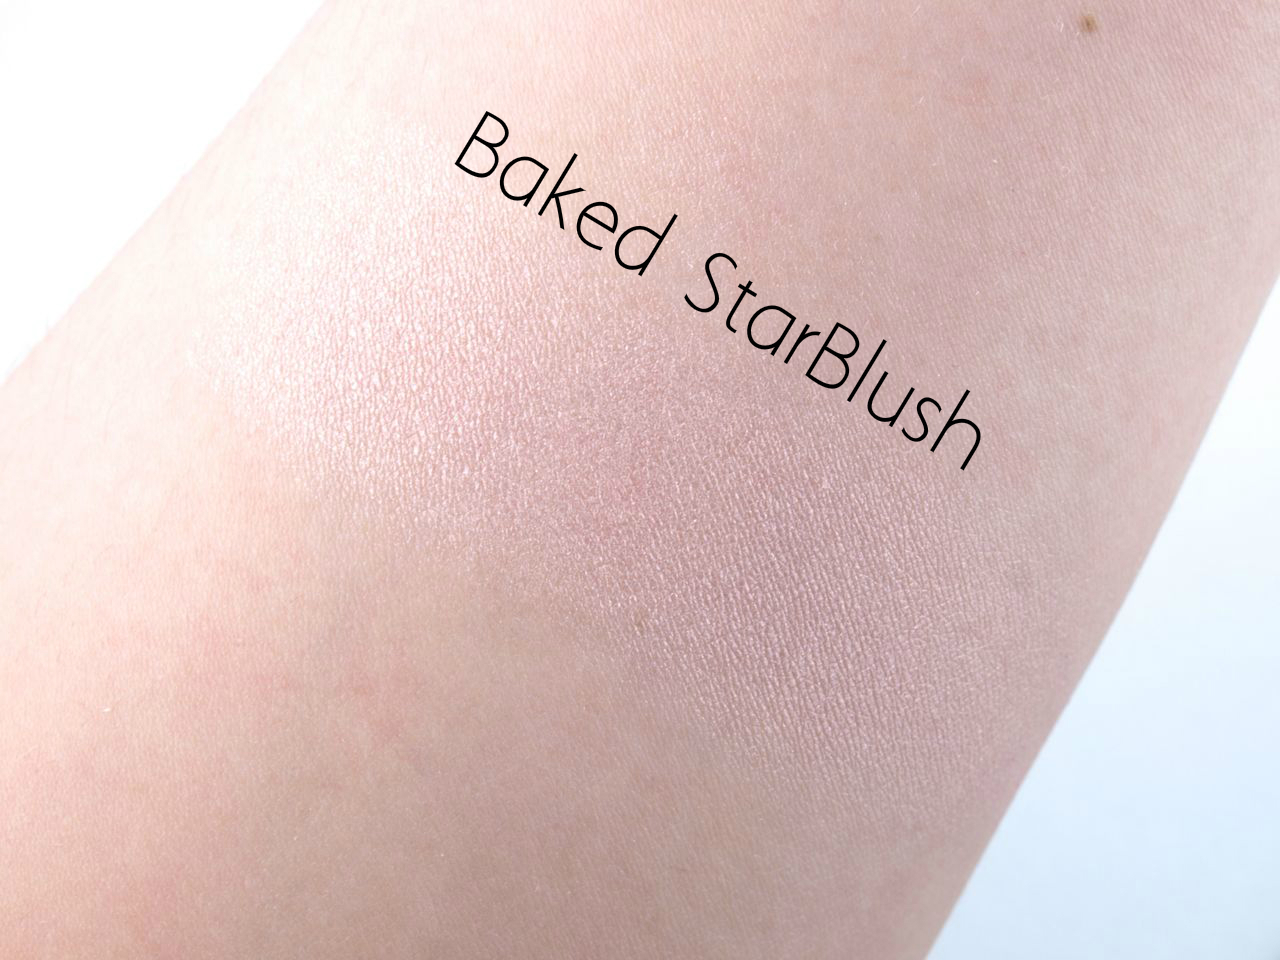 Smashbox Fusion Soft Lights in Baked StarBlush: Review and Swatches